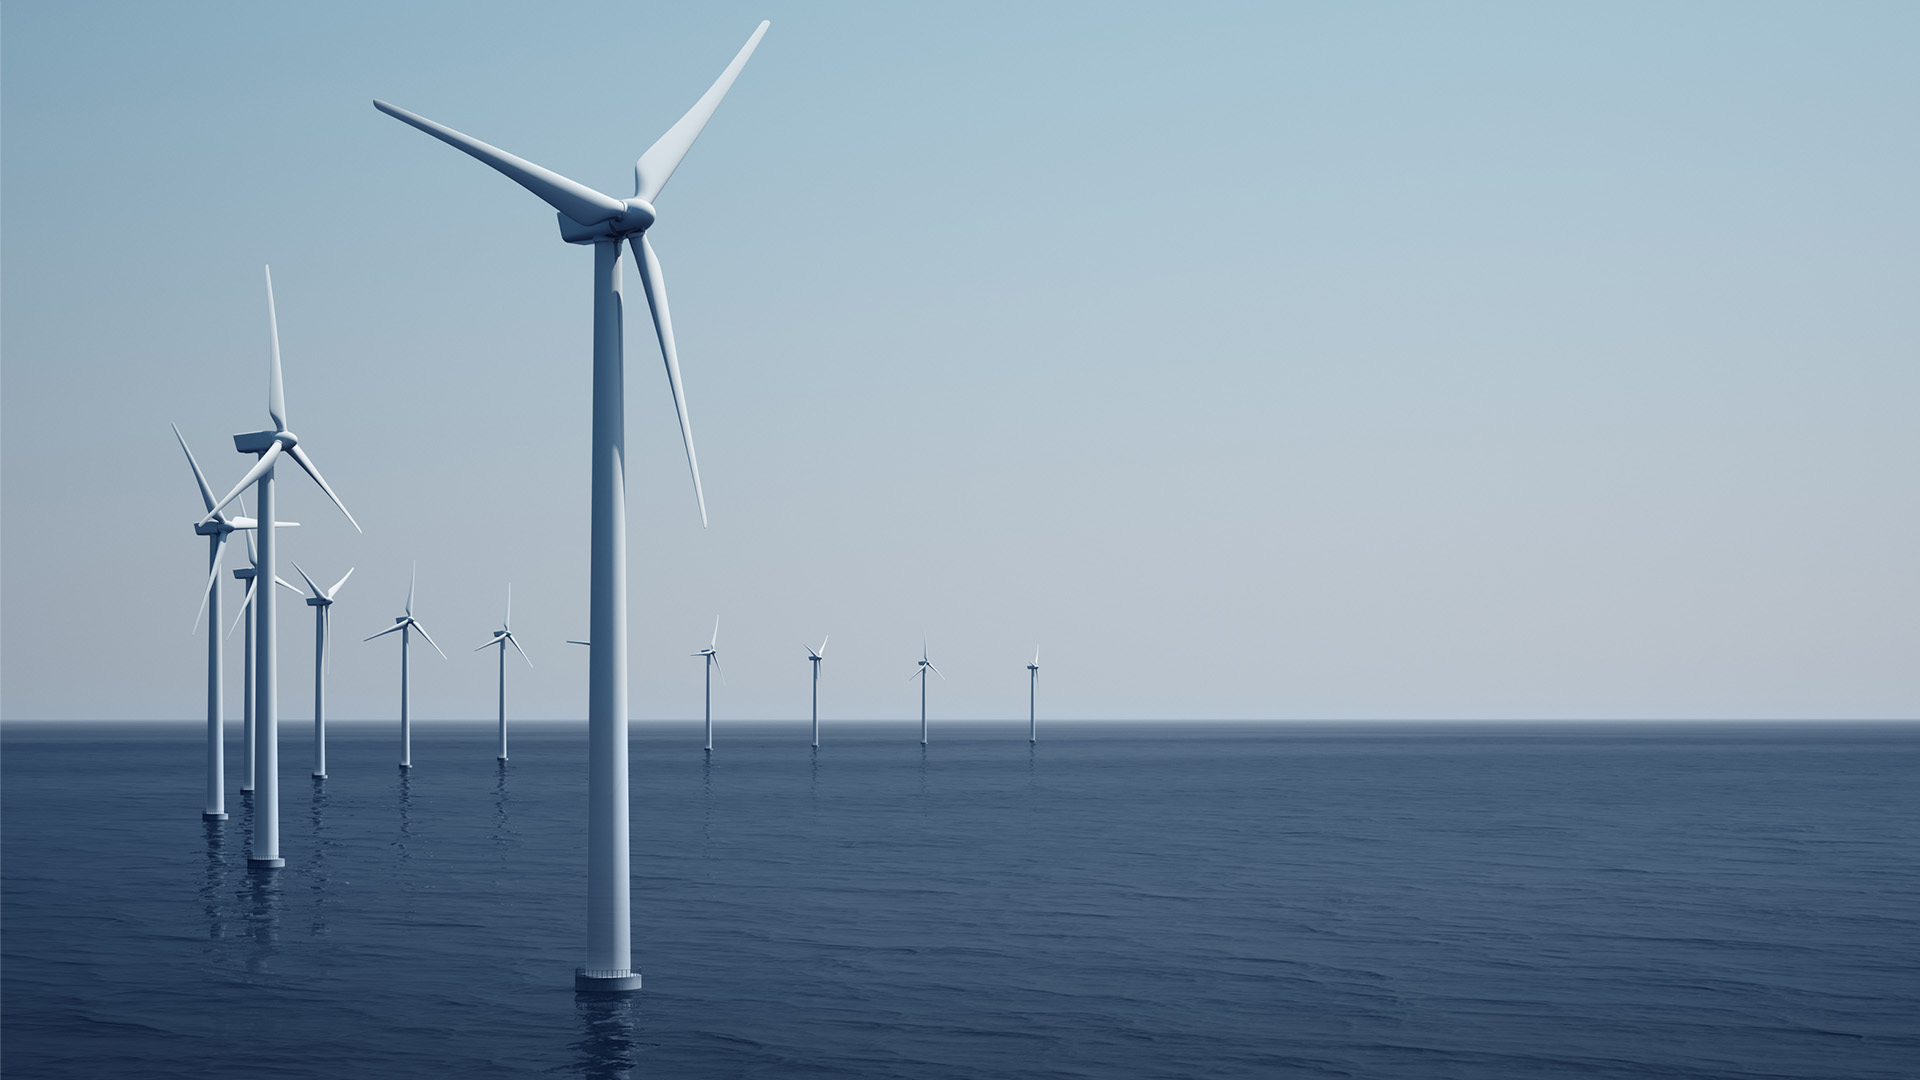 Efficient, cost-effective transaction closing for the world’s largest off-shore windfarm